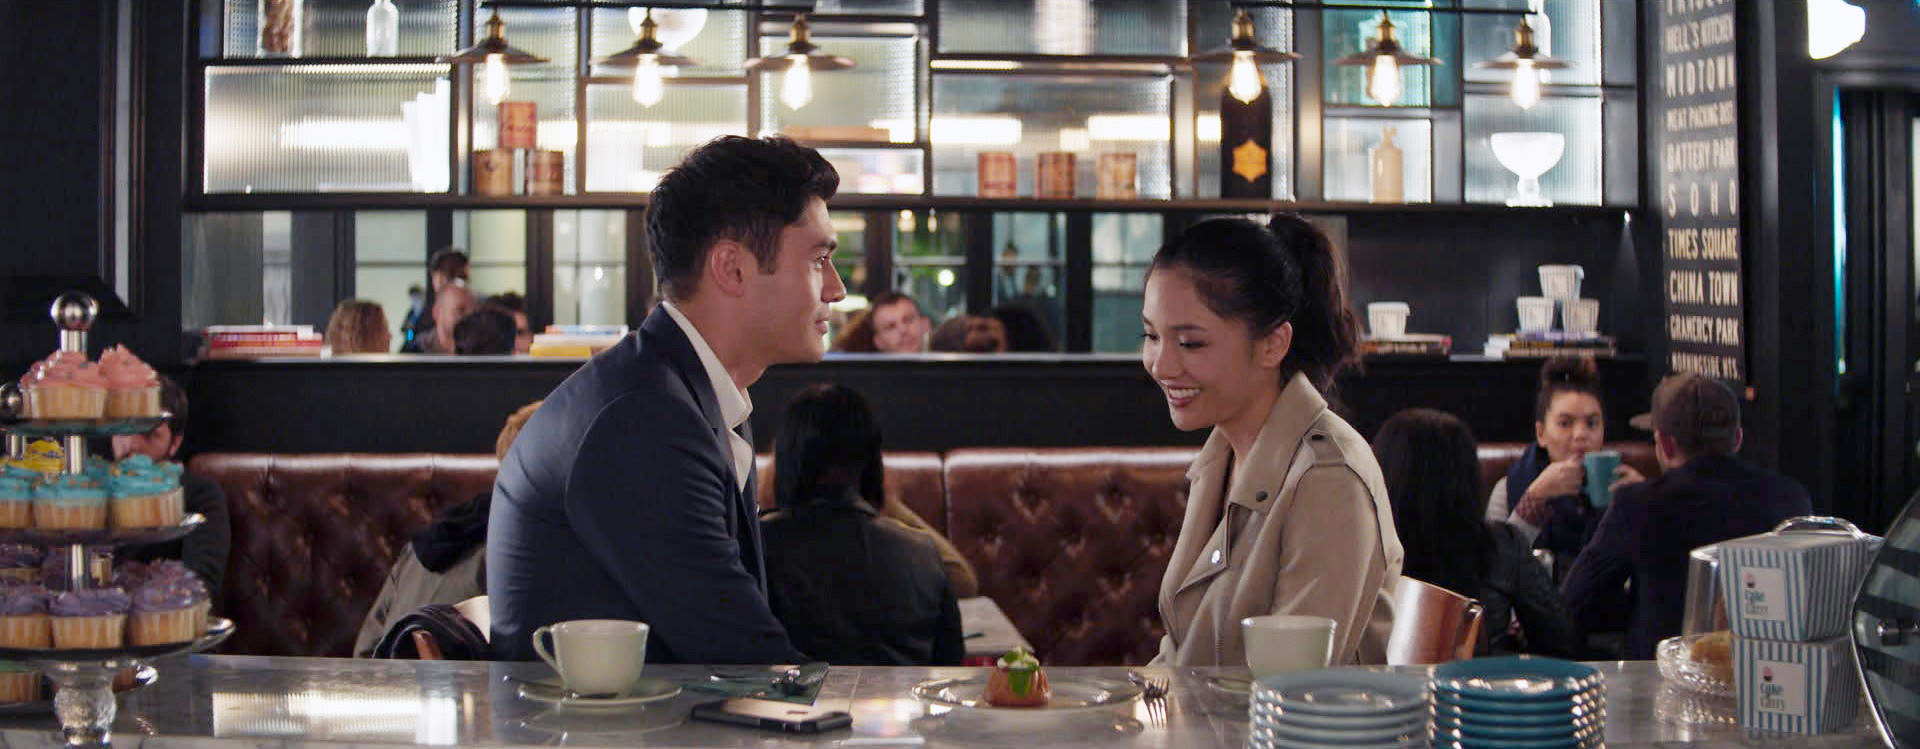 Constance Wu and Henry Golding have coffee at a fancy New York lunch spot